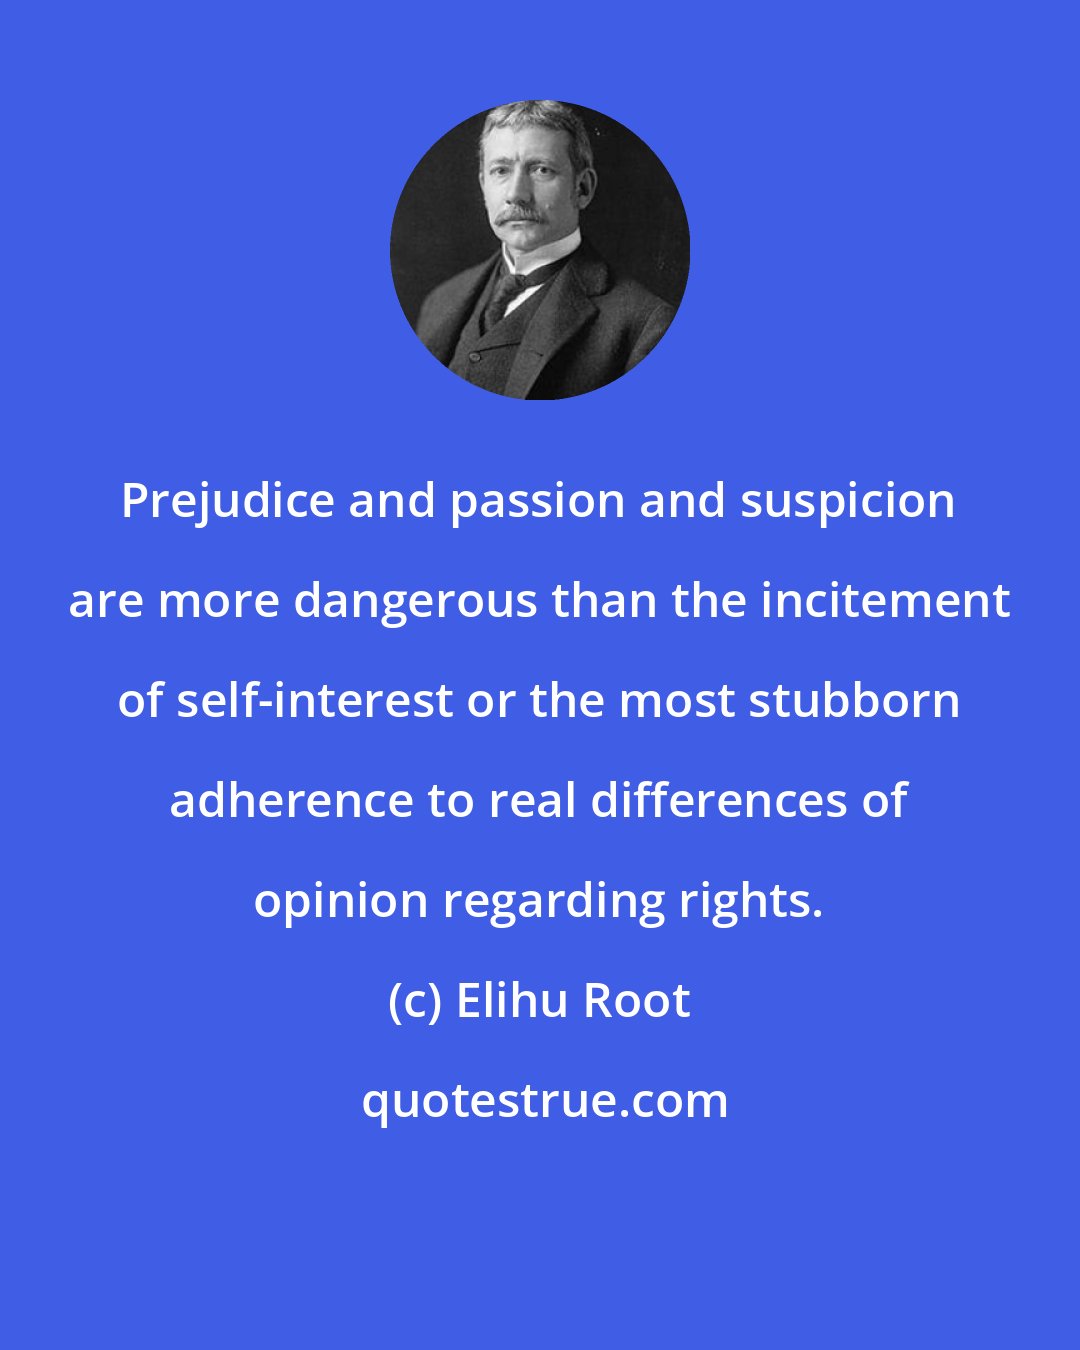 Elihu Root: Prejudice and passion and suspicion are more dangerous than the incitement of self-interest or the most stubborn adherence to real differences of opinion regarding rights.